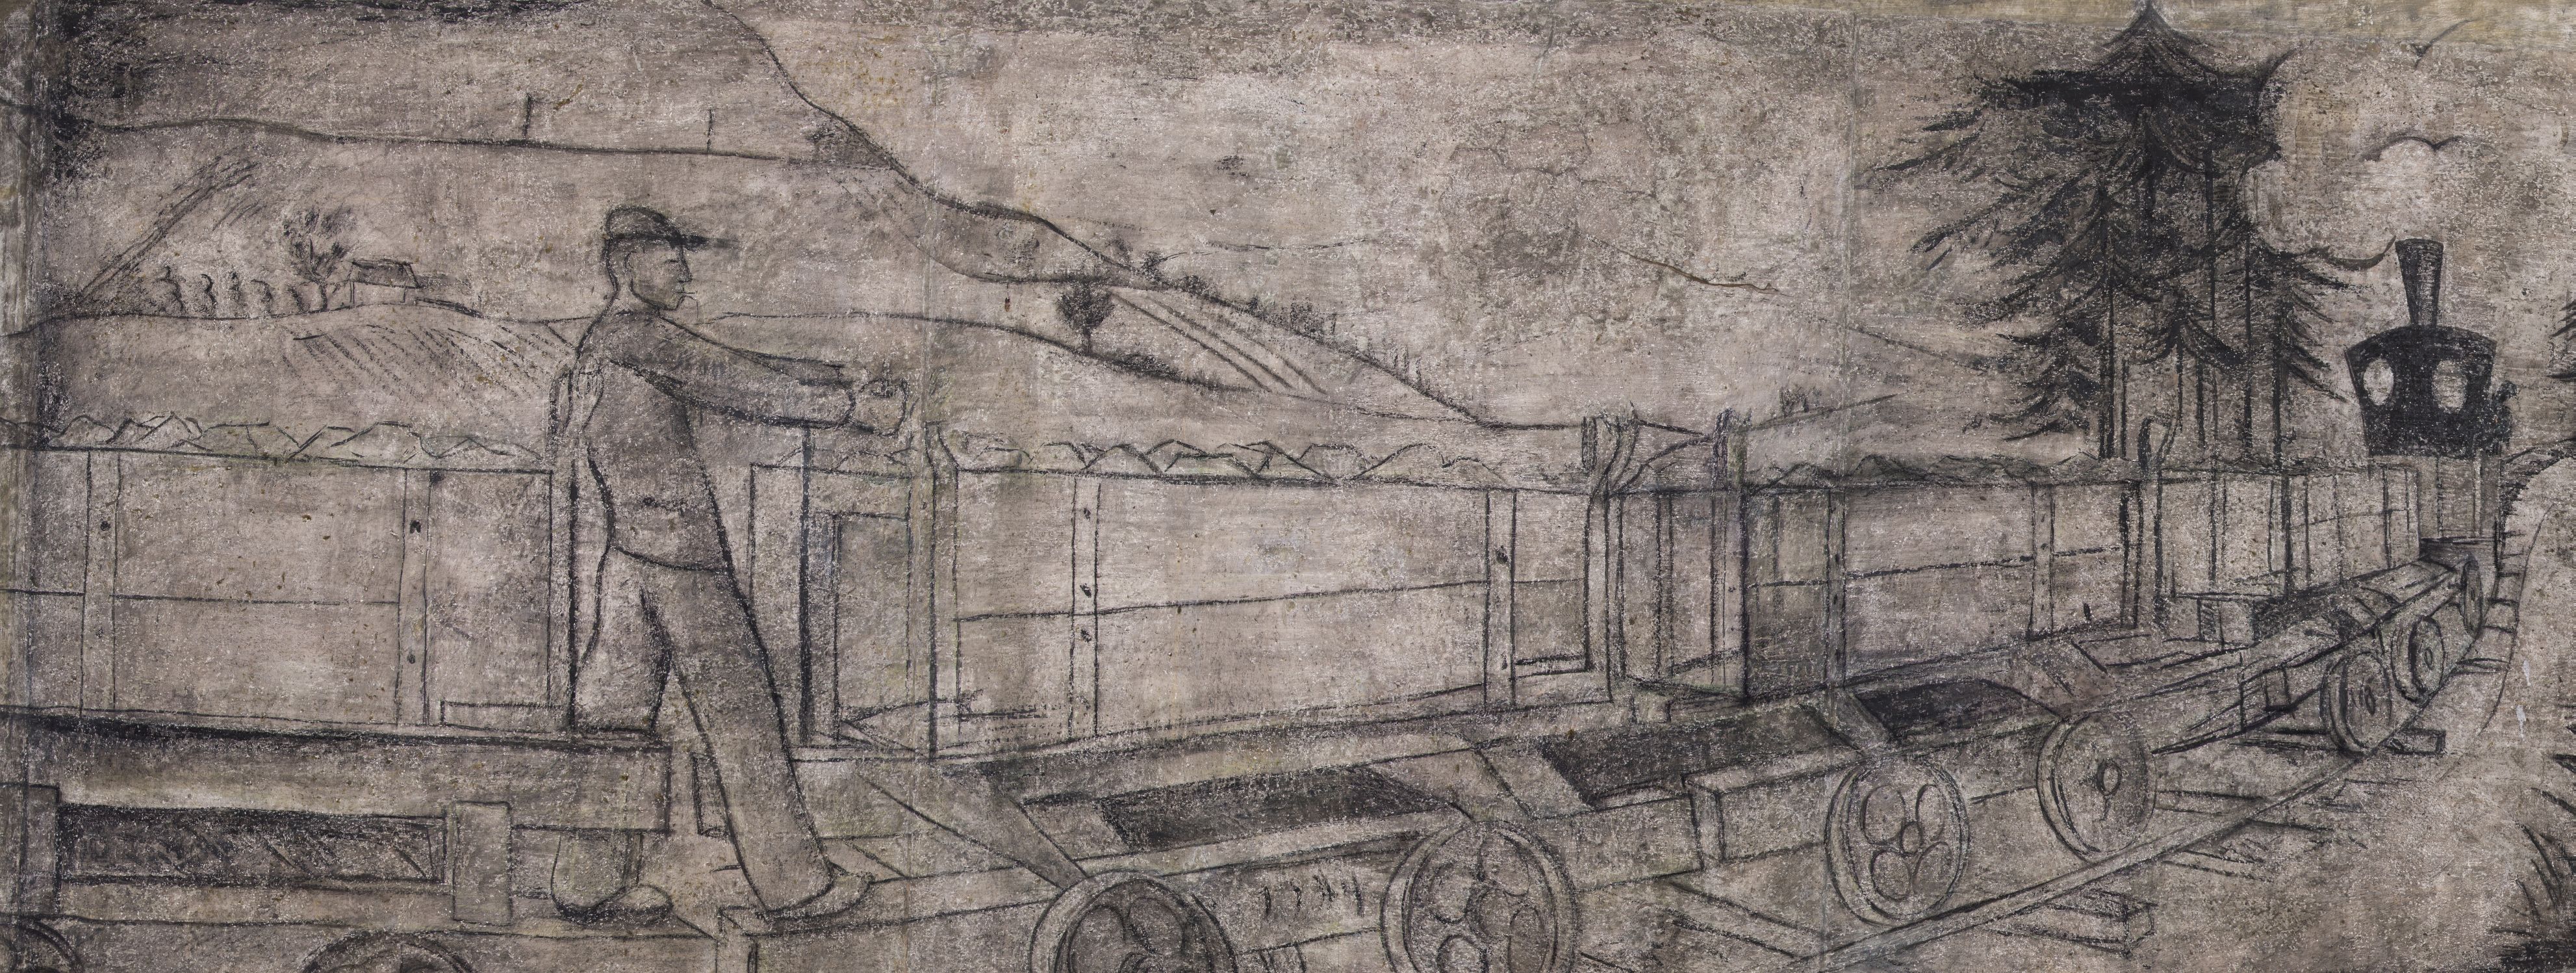 Plaster painting. Railway with carriages loaded with stone. In the foreground, a prisoner is working at loading. In the background a hill and tall trees.